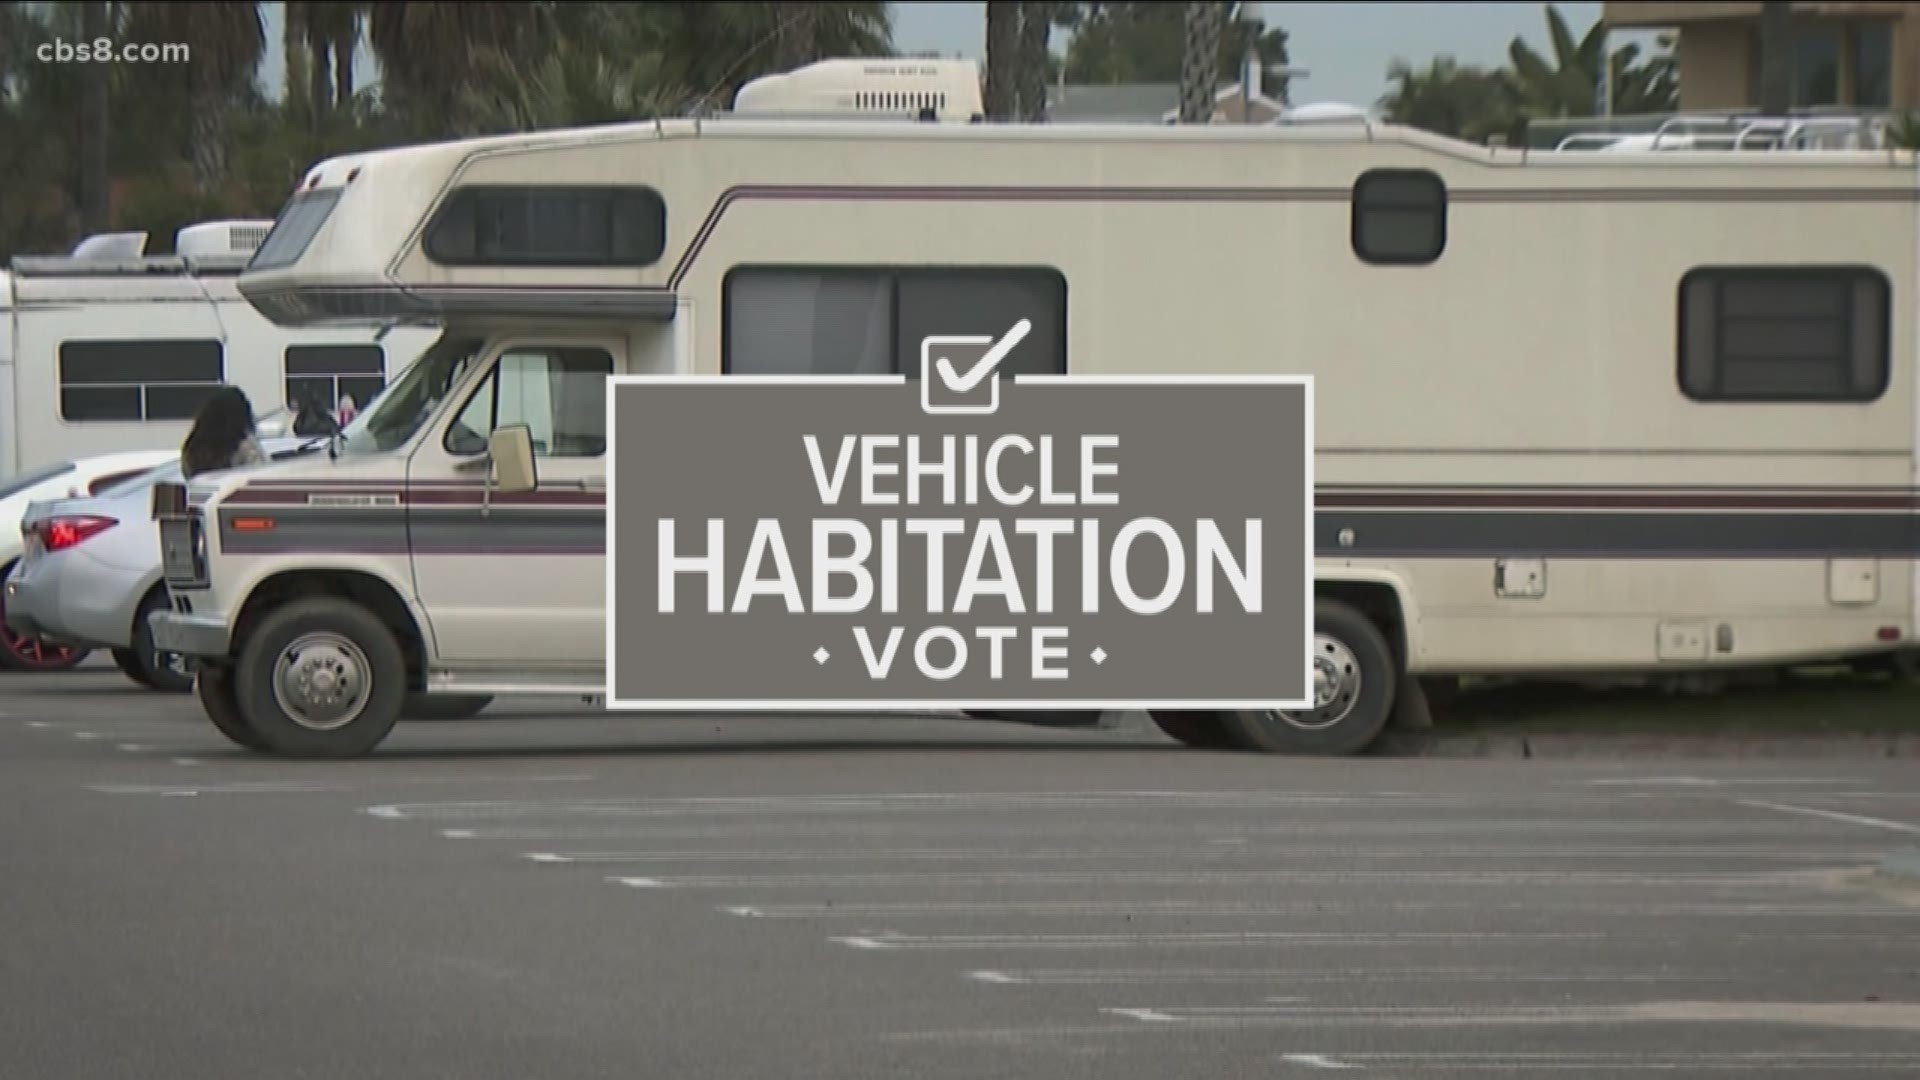 The San Diego City Council voted Tuesday in favor of an ordinance that places a limited ban on residents sleeping overnight or living in their cars within city limits.